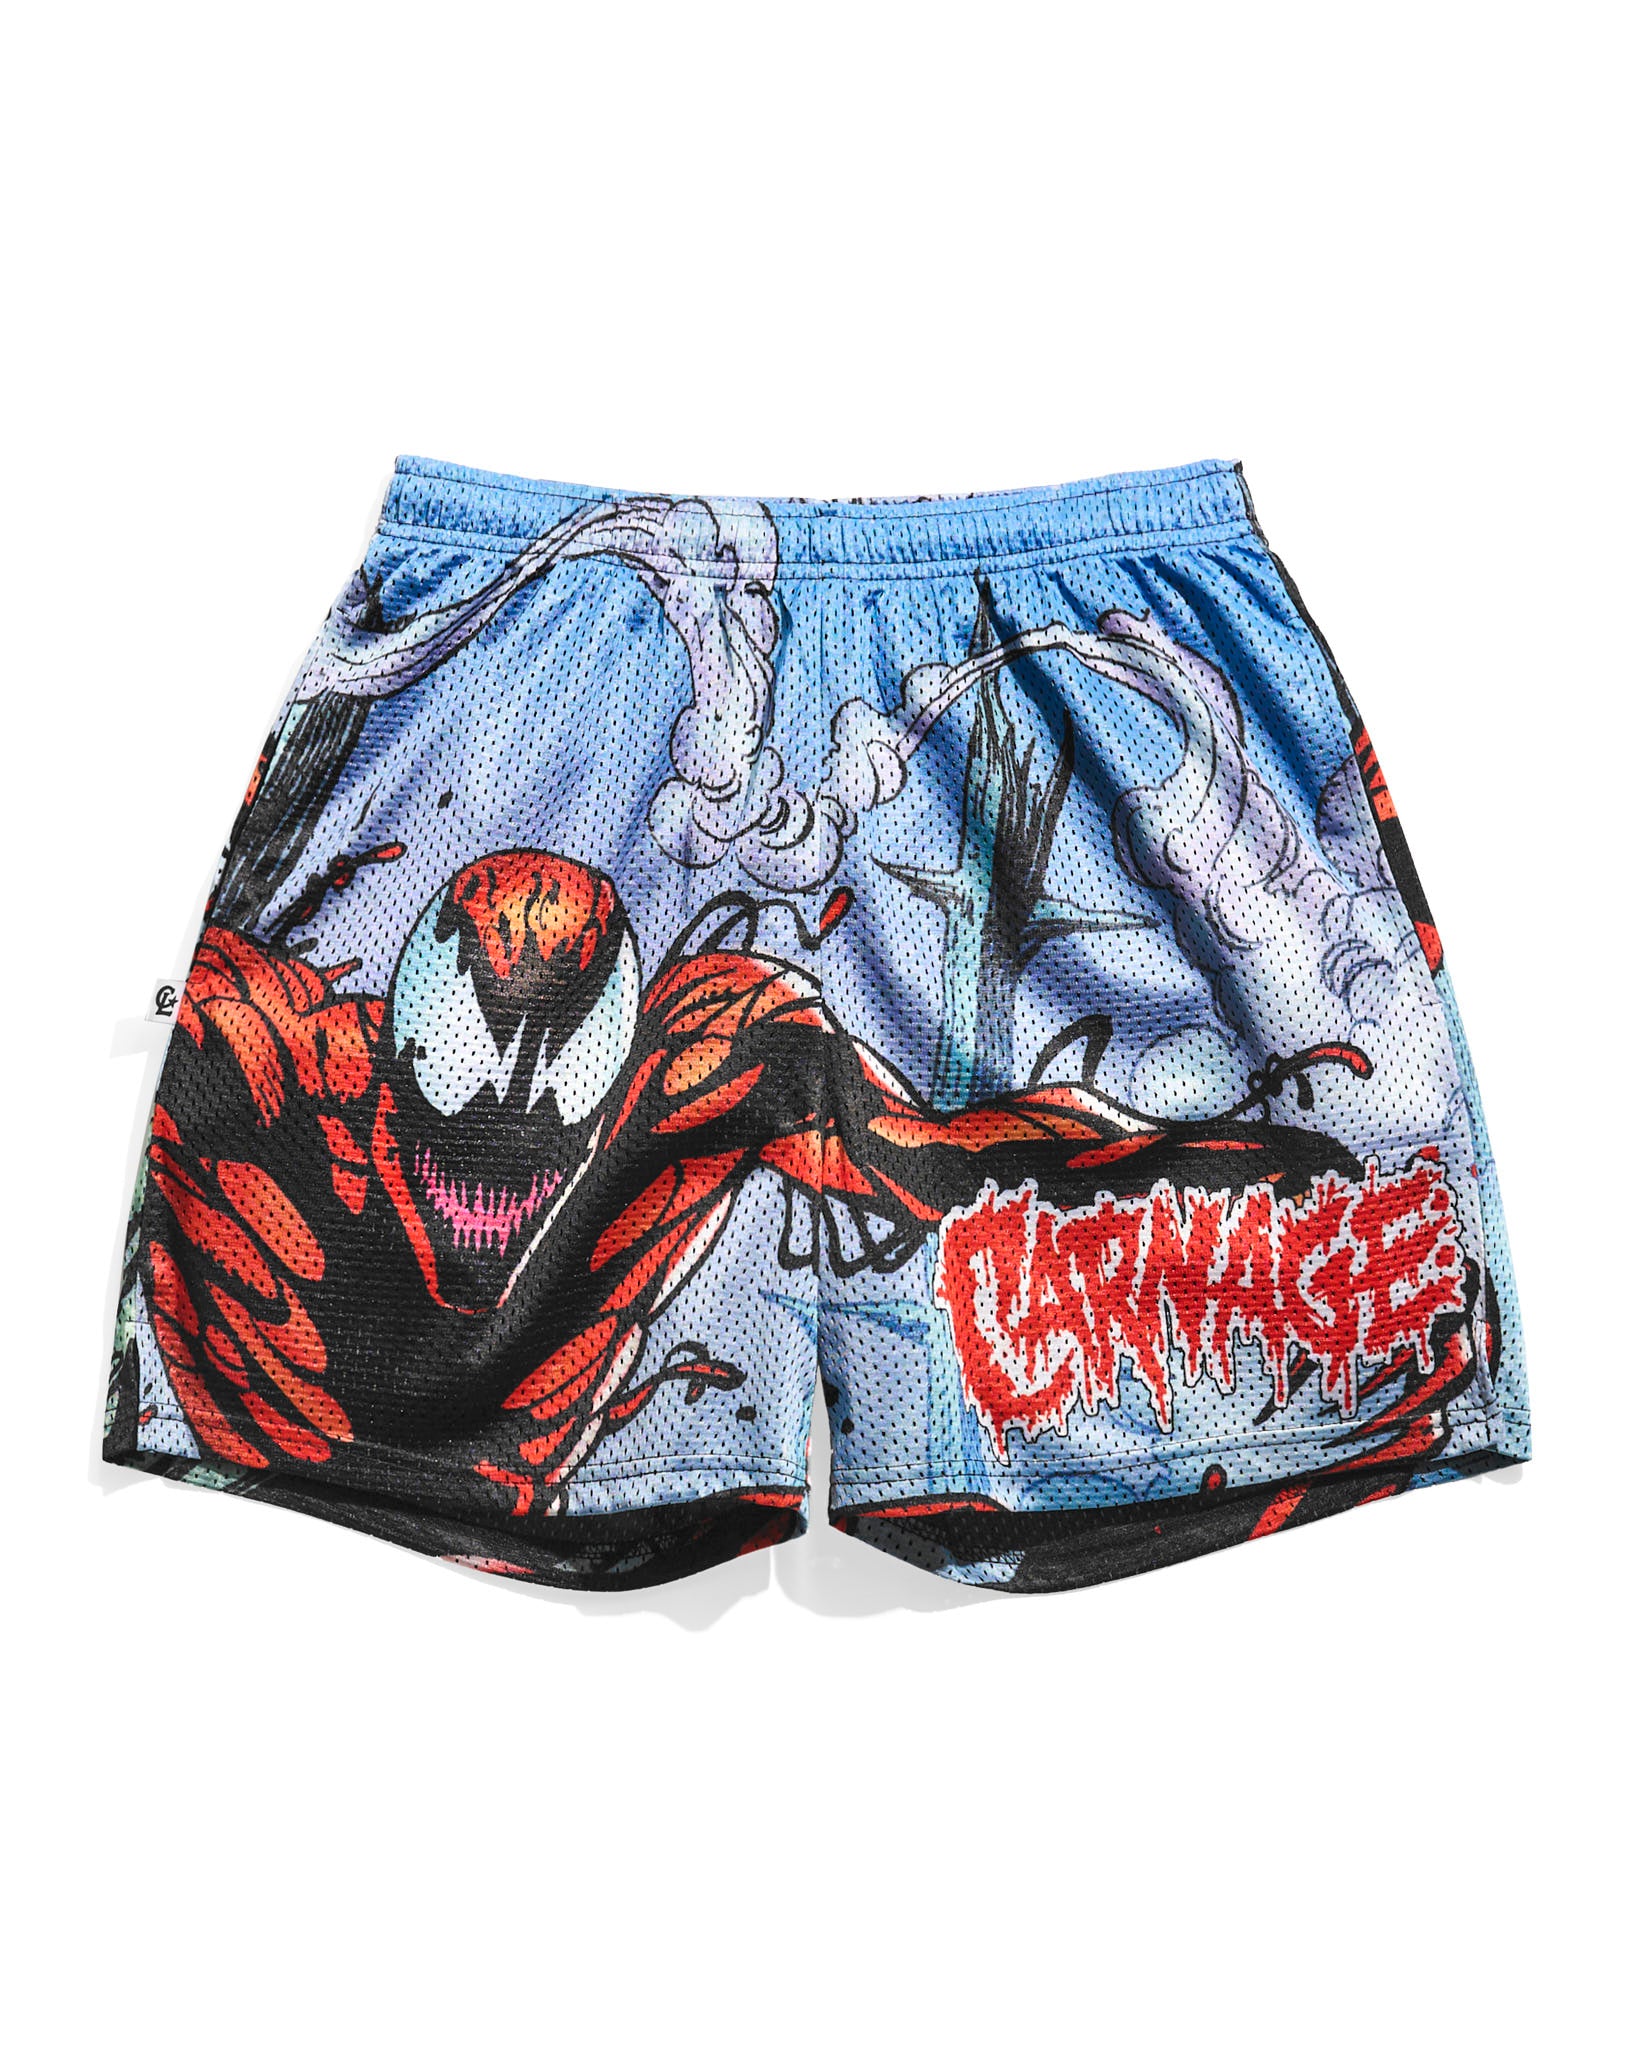 Absolute Carnage #1 Retro Shorts